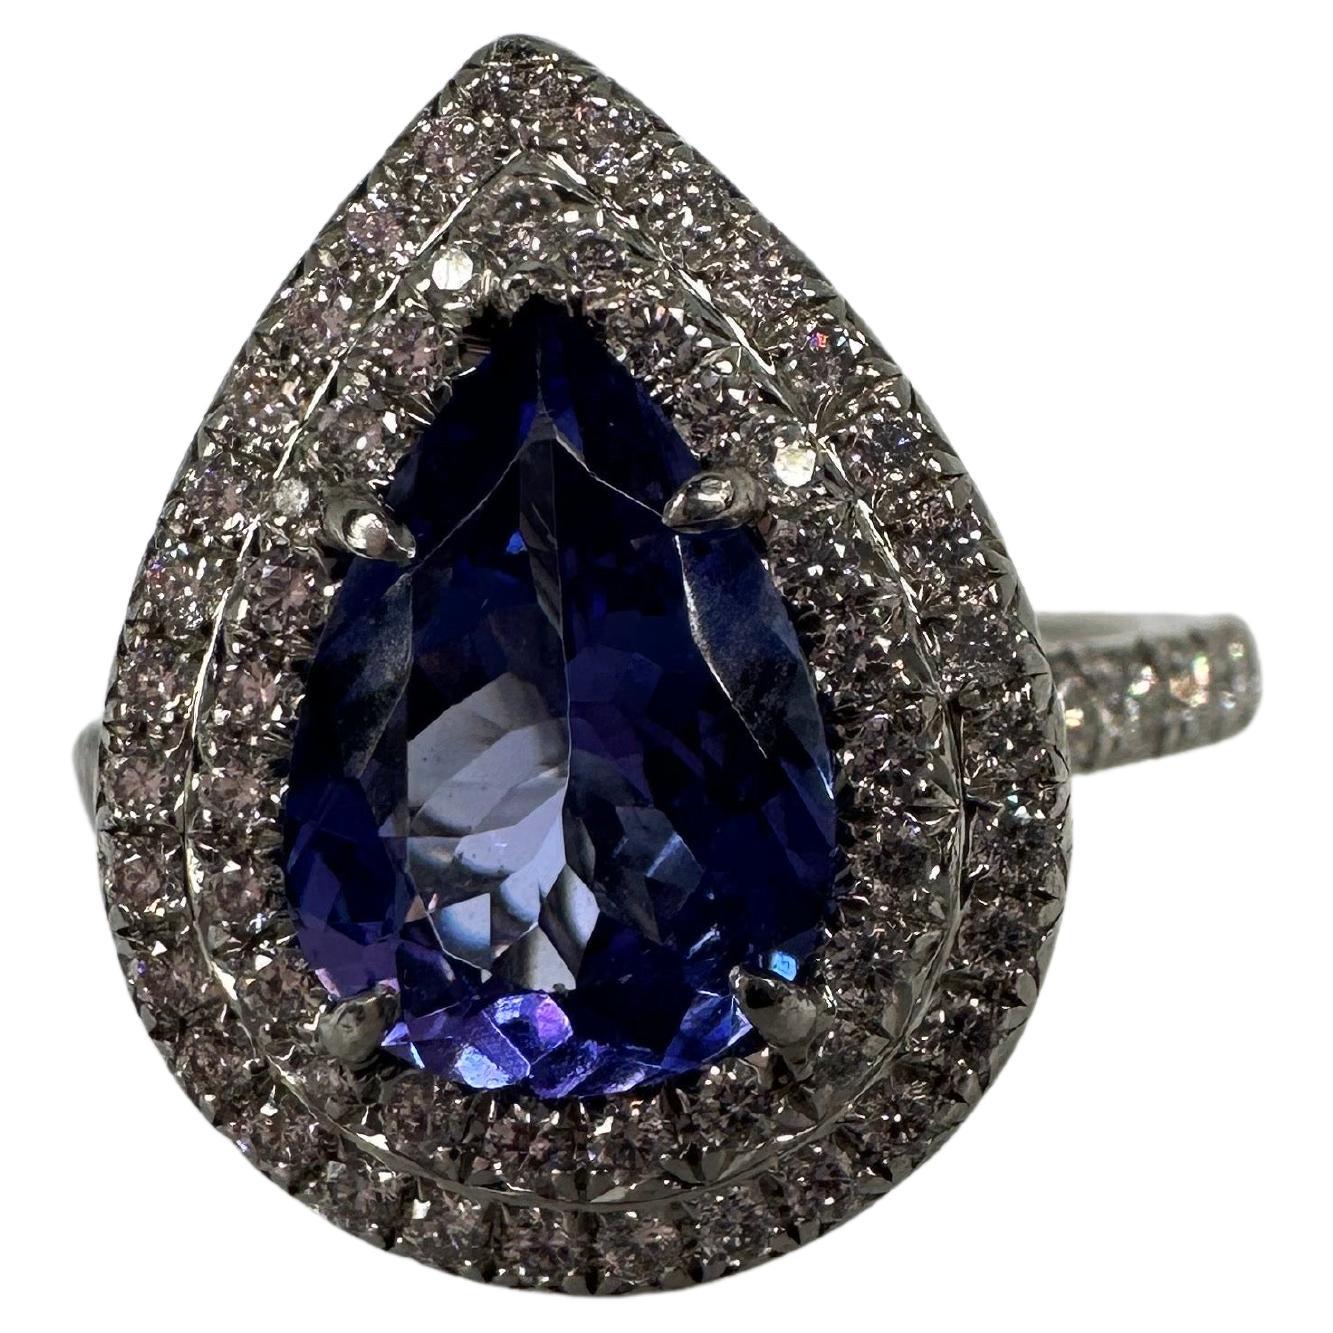 Tiffany & Co tanzanite and diamond ring in platinum, exquisite craftsmanship by a wonderful designer, the ring has a stunning violet center Tanzanite at 1.5 carats.

METAL: PLATINUM
NATURAL DIAMOND(S)
Clarity/Color: VS/F
Carat:0.45ct
Cut:Round